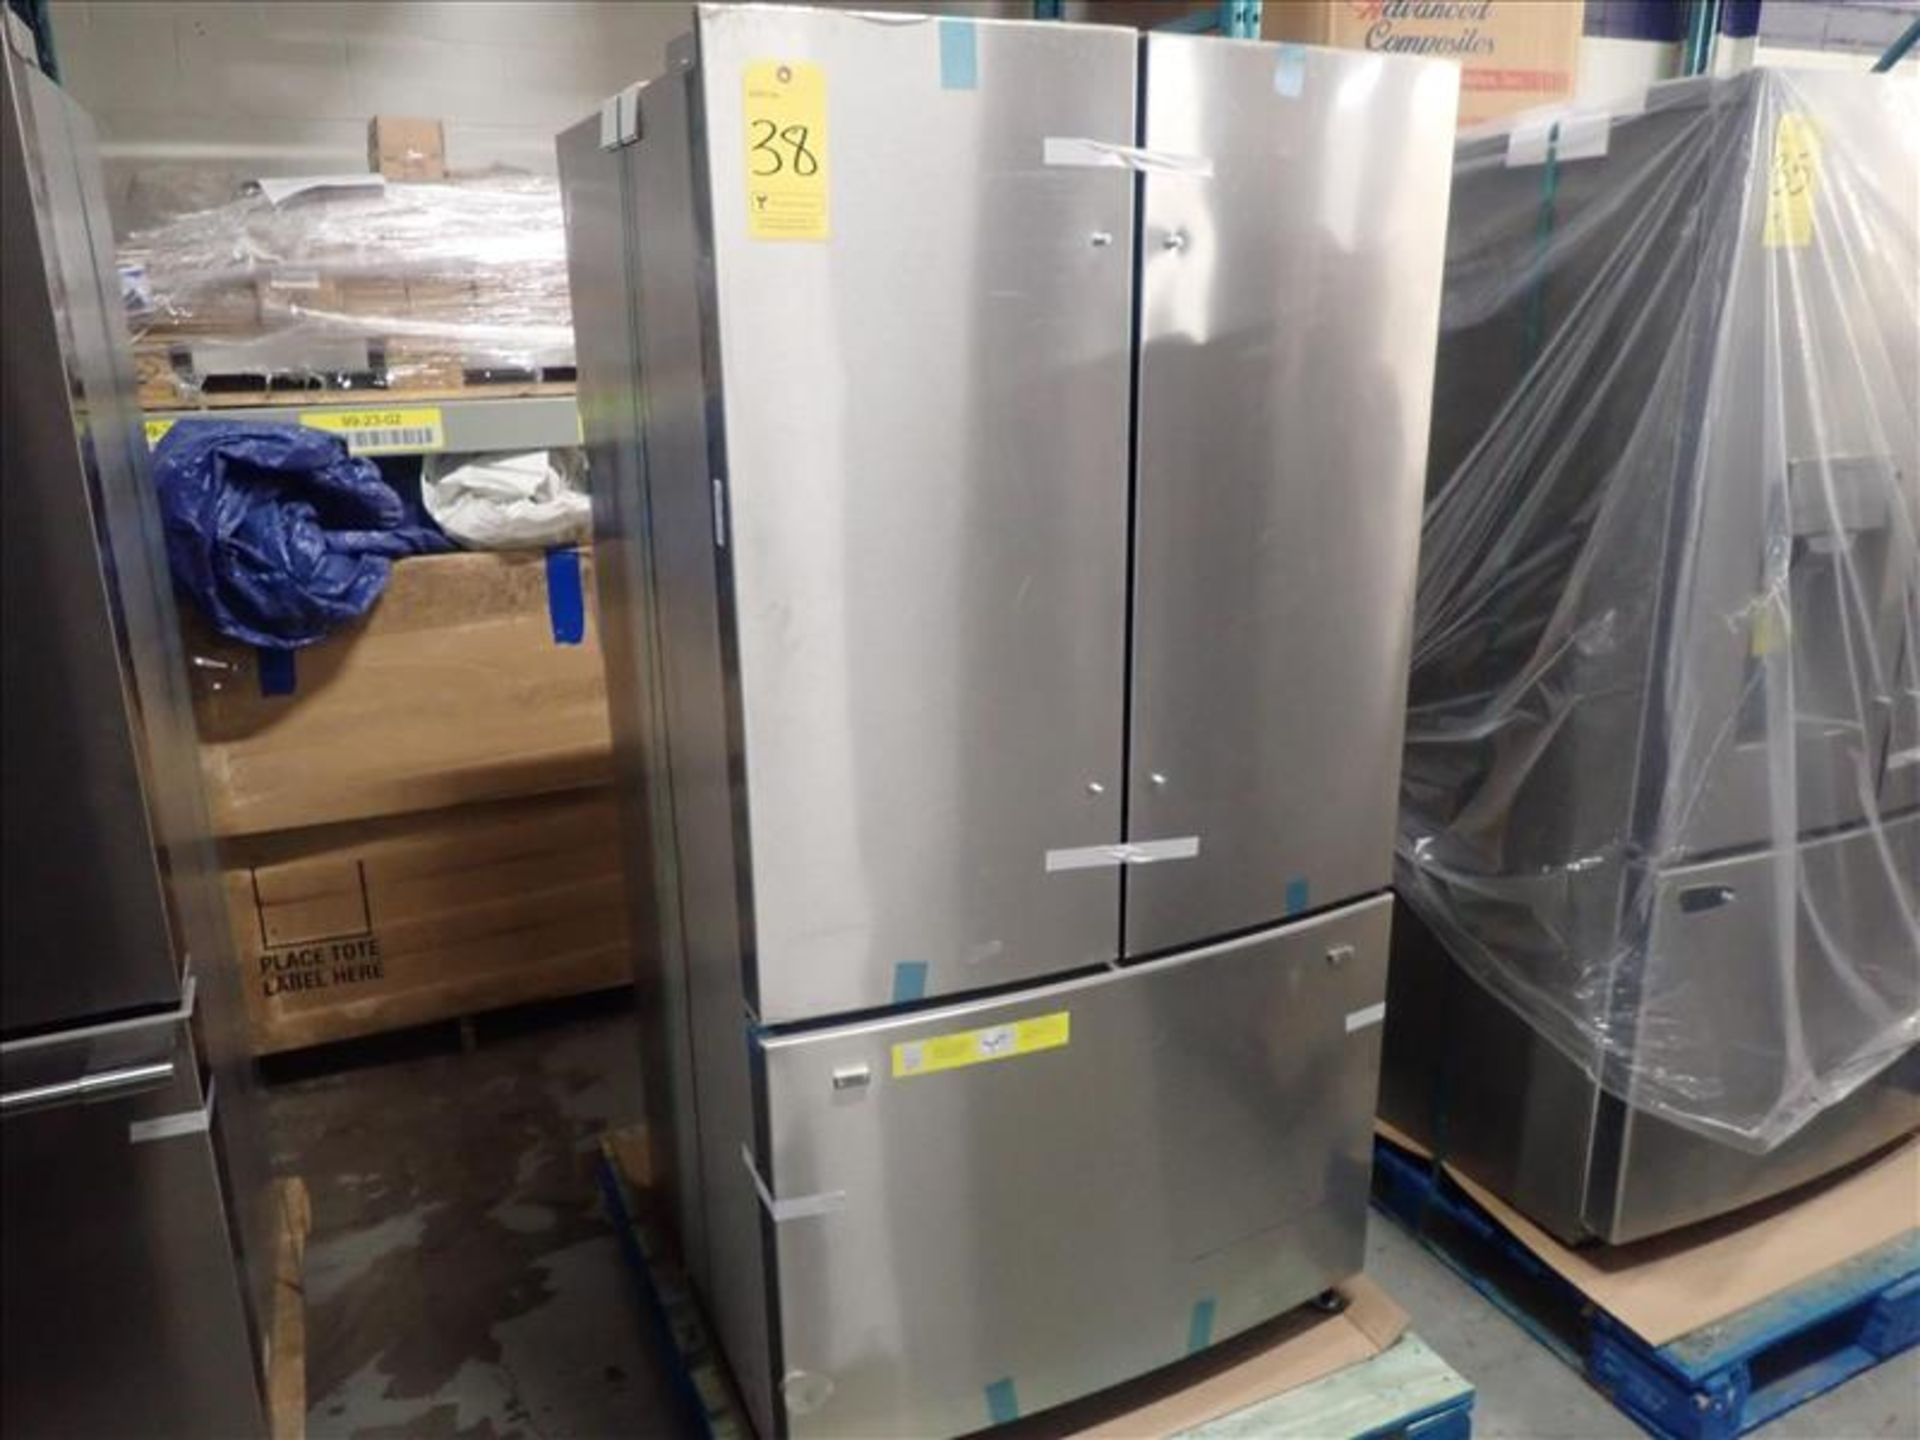 Electrolux bottom freezer french door refrigerator, mod. FFHN2750TS9, stainless steel finish, 36 in.